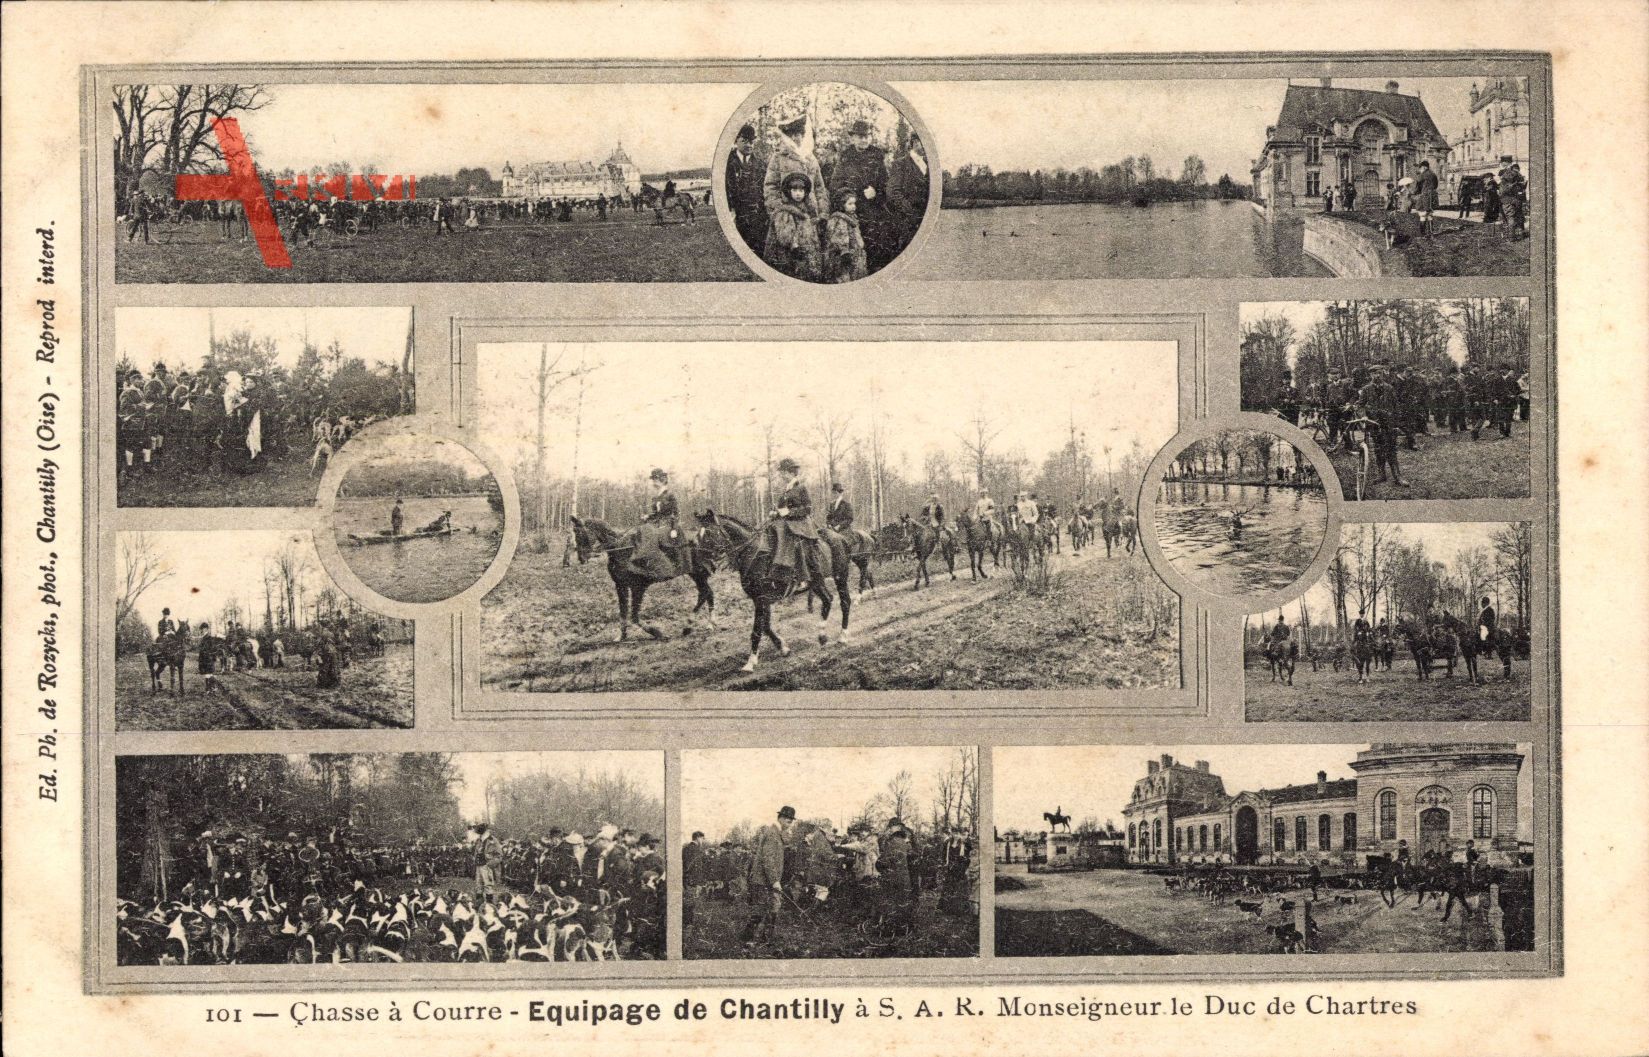 Chantilly Oise, Equipage de Chantilly, Chasse a Courre, Duc de Chartres